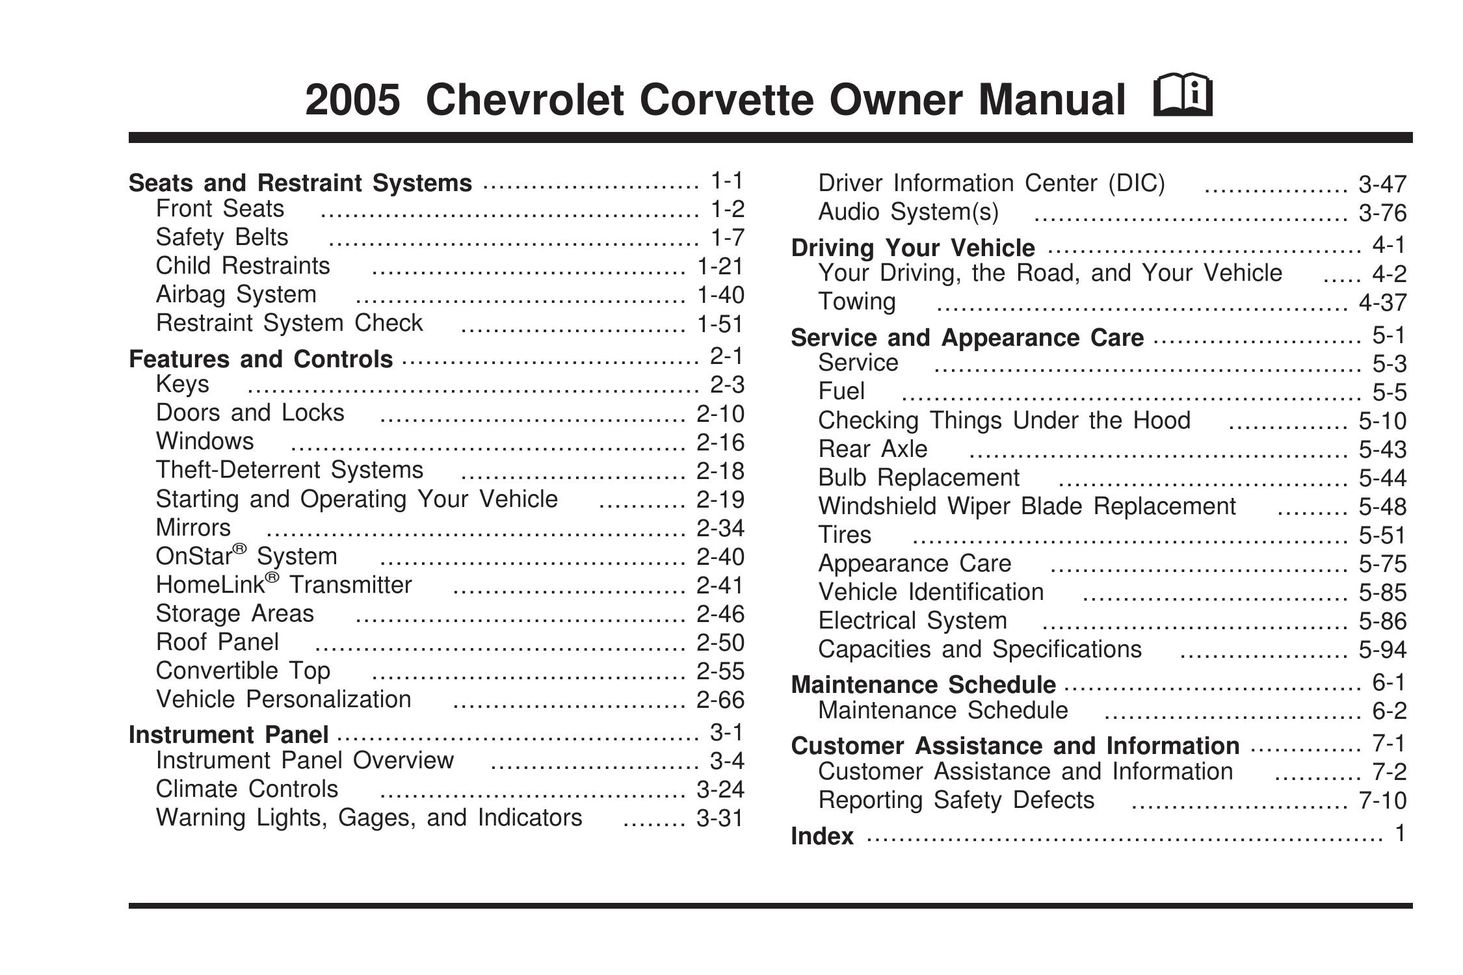 Chevrolet 2005 Personal Computer User Manual